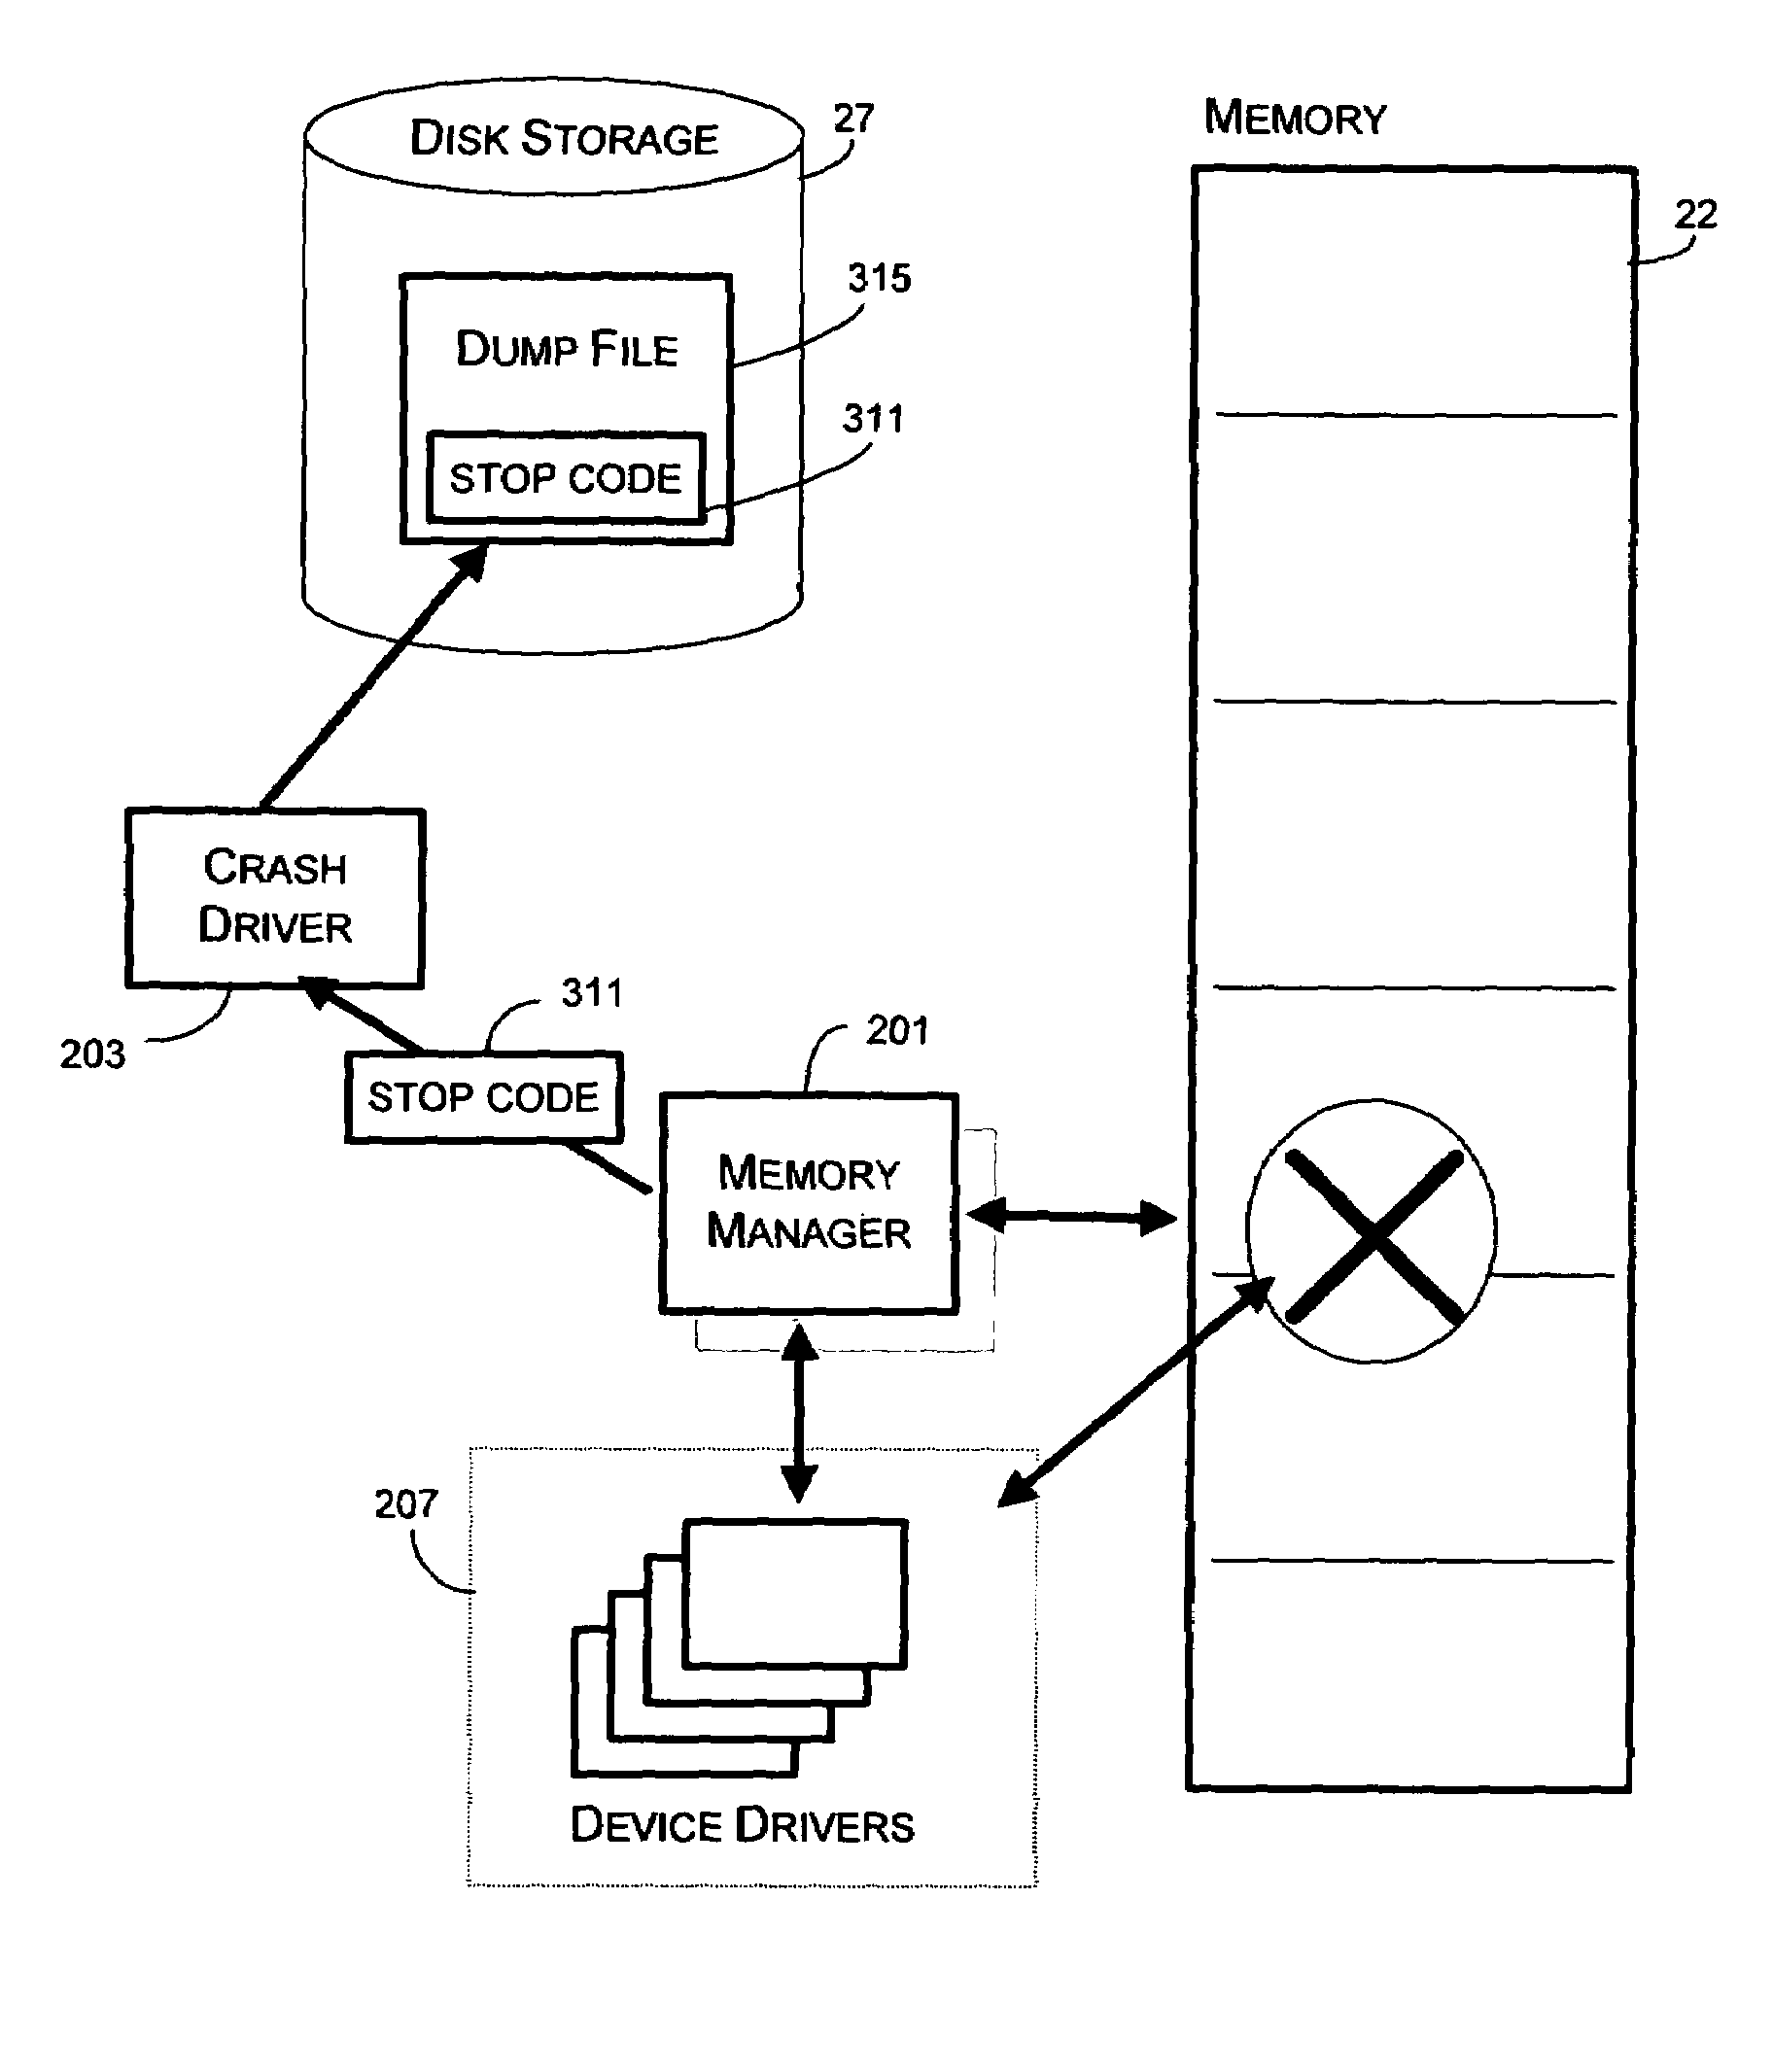 System and method for self-diagnosing system crashes